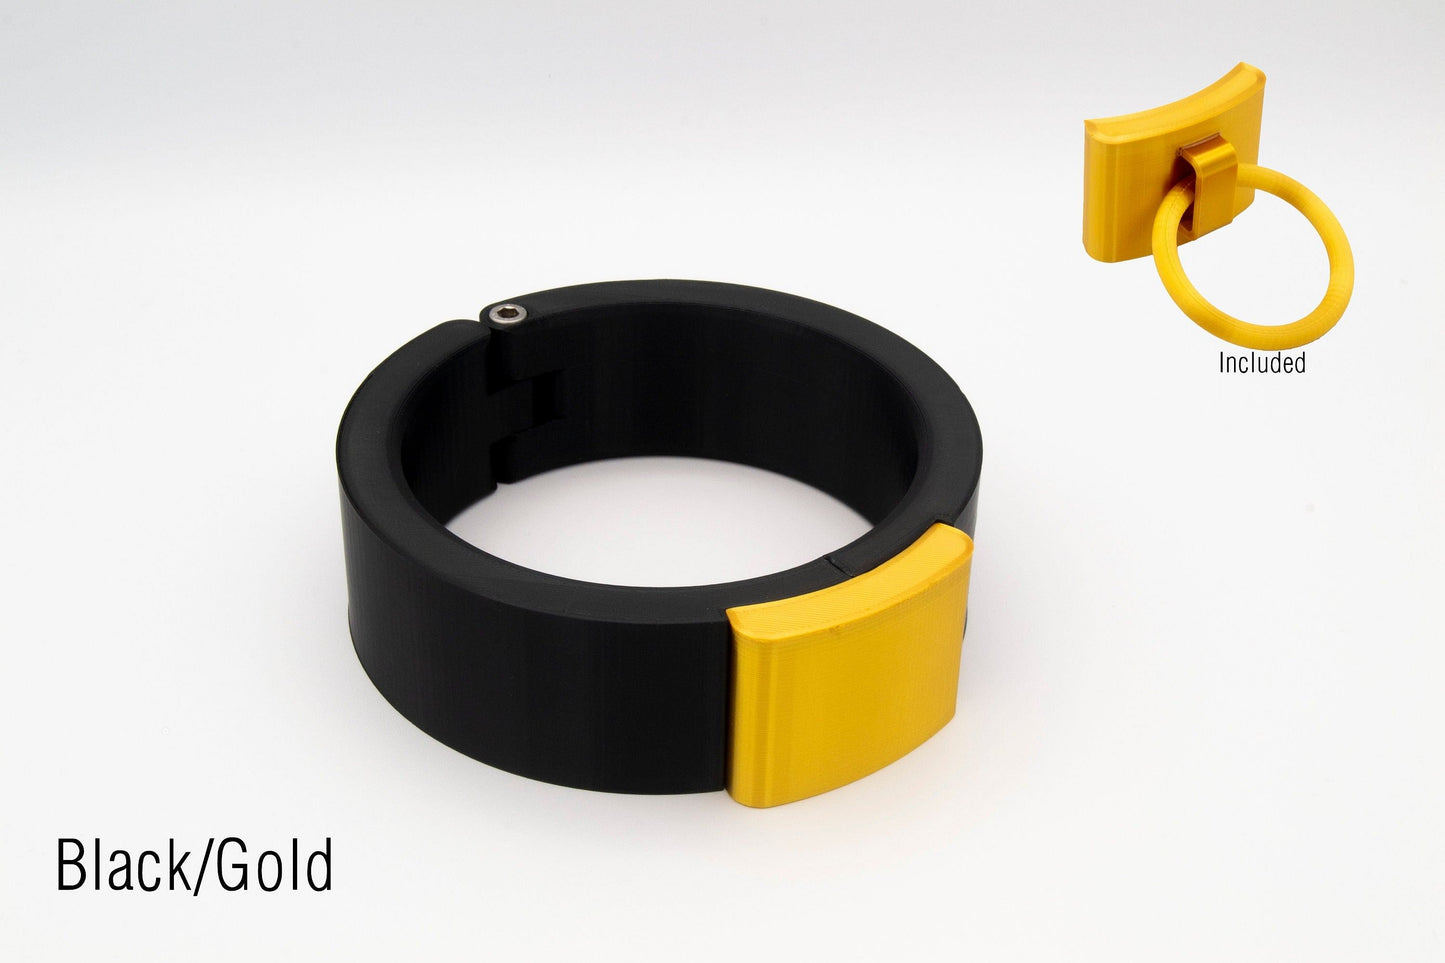 sleek nordic collar featuring a golden fastener with a ring